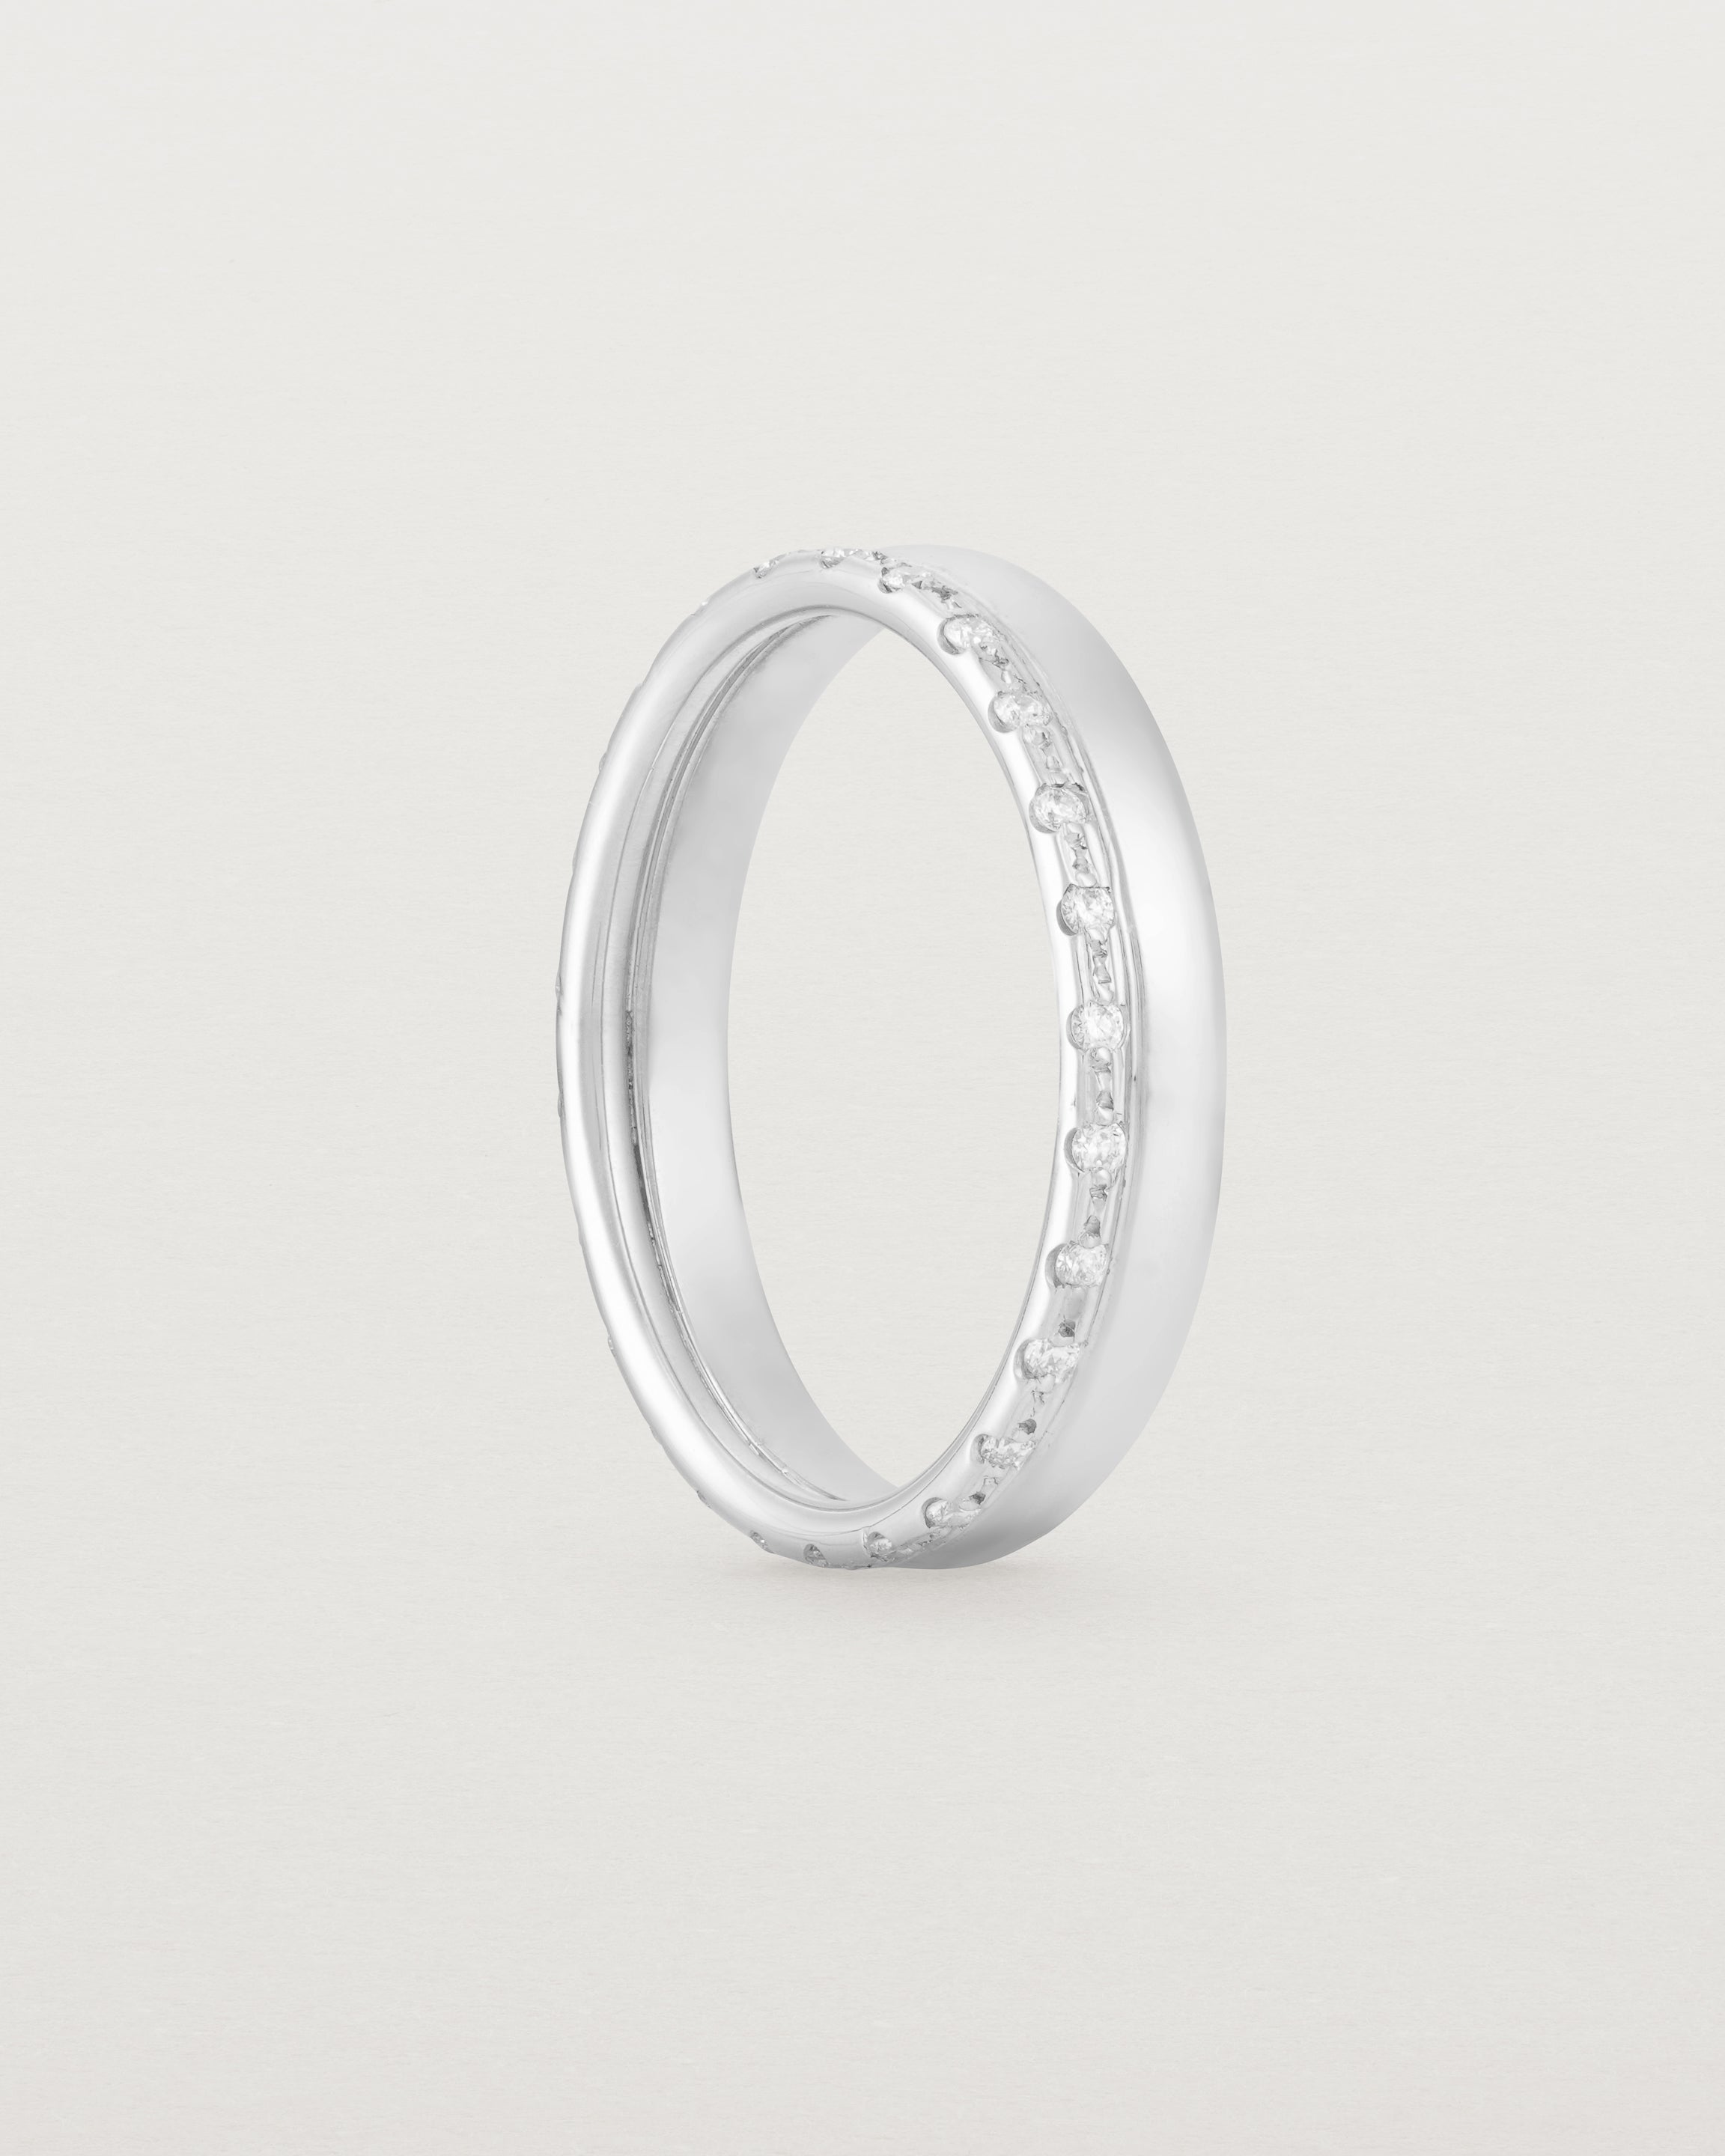 Standing view of the Cascade Double Band | Diamonds | White Gold